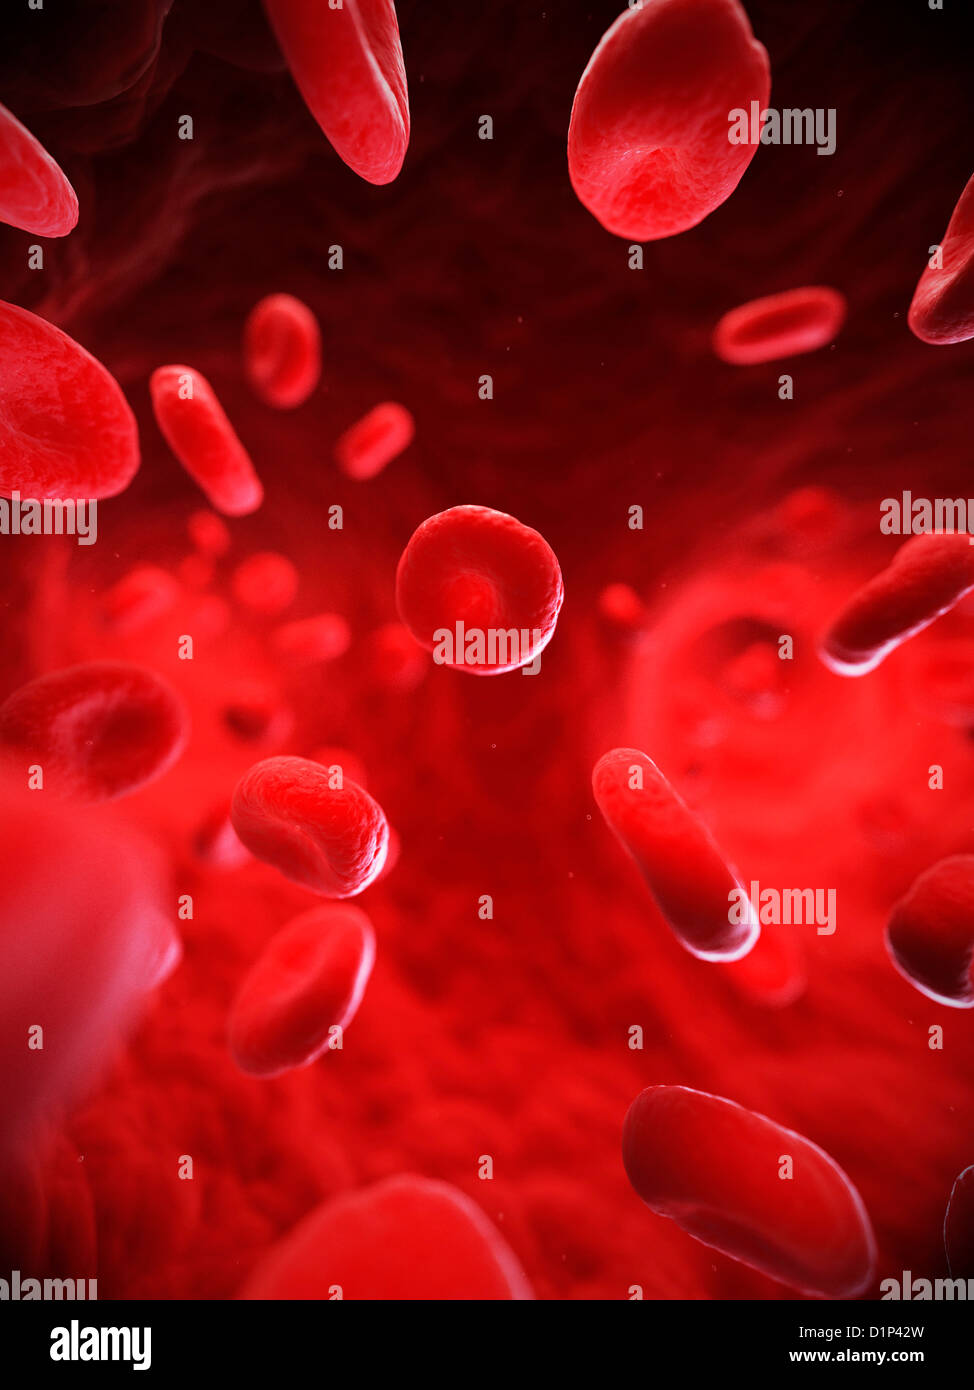 Red blood cells, artwork Stock Photo